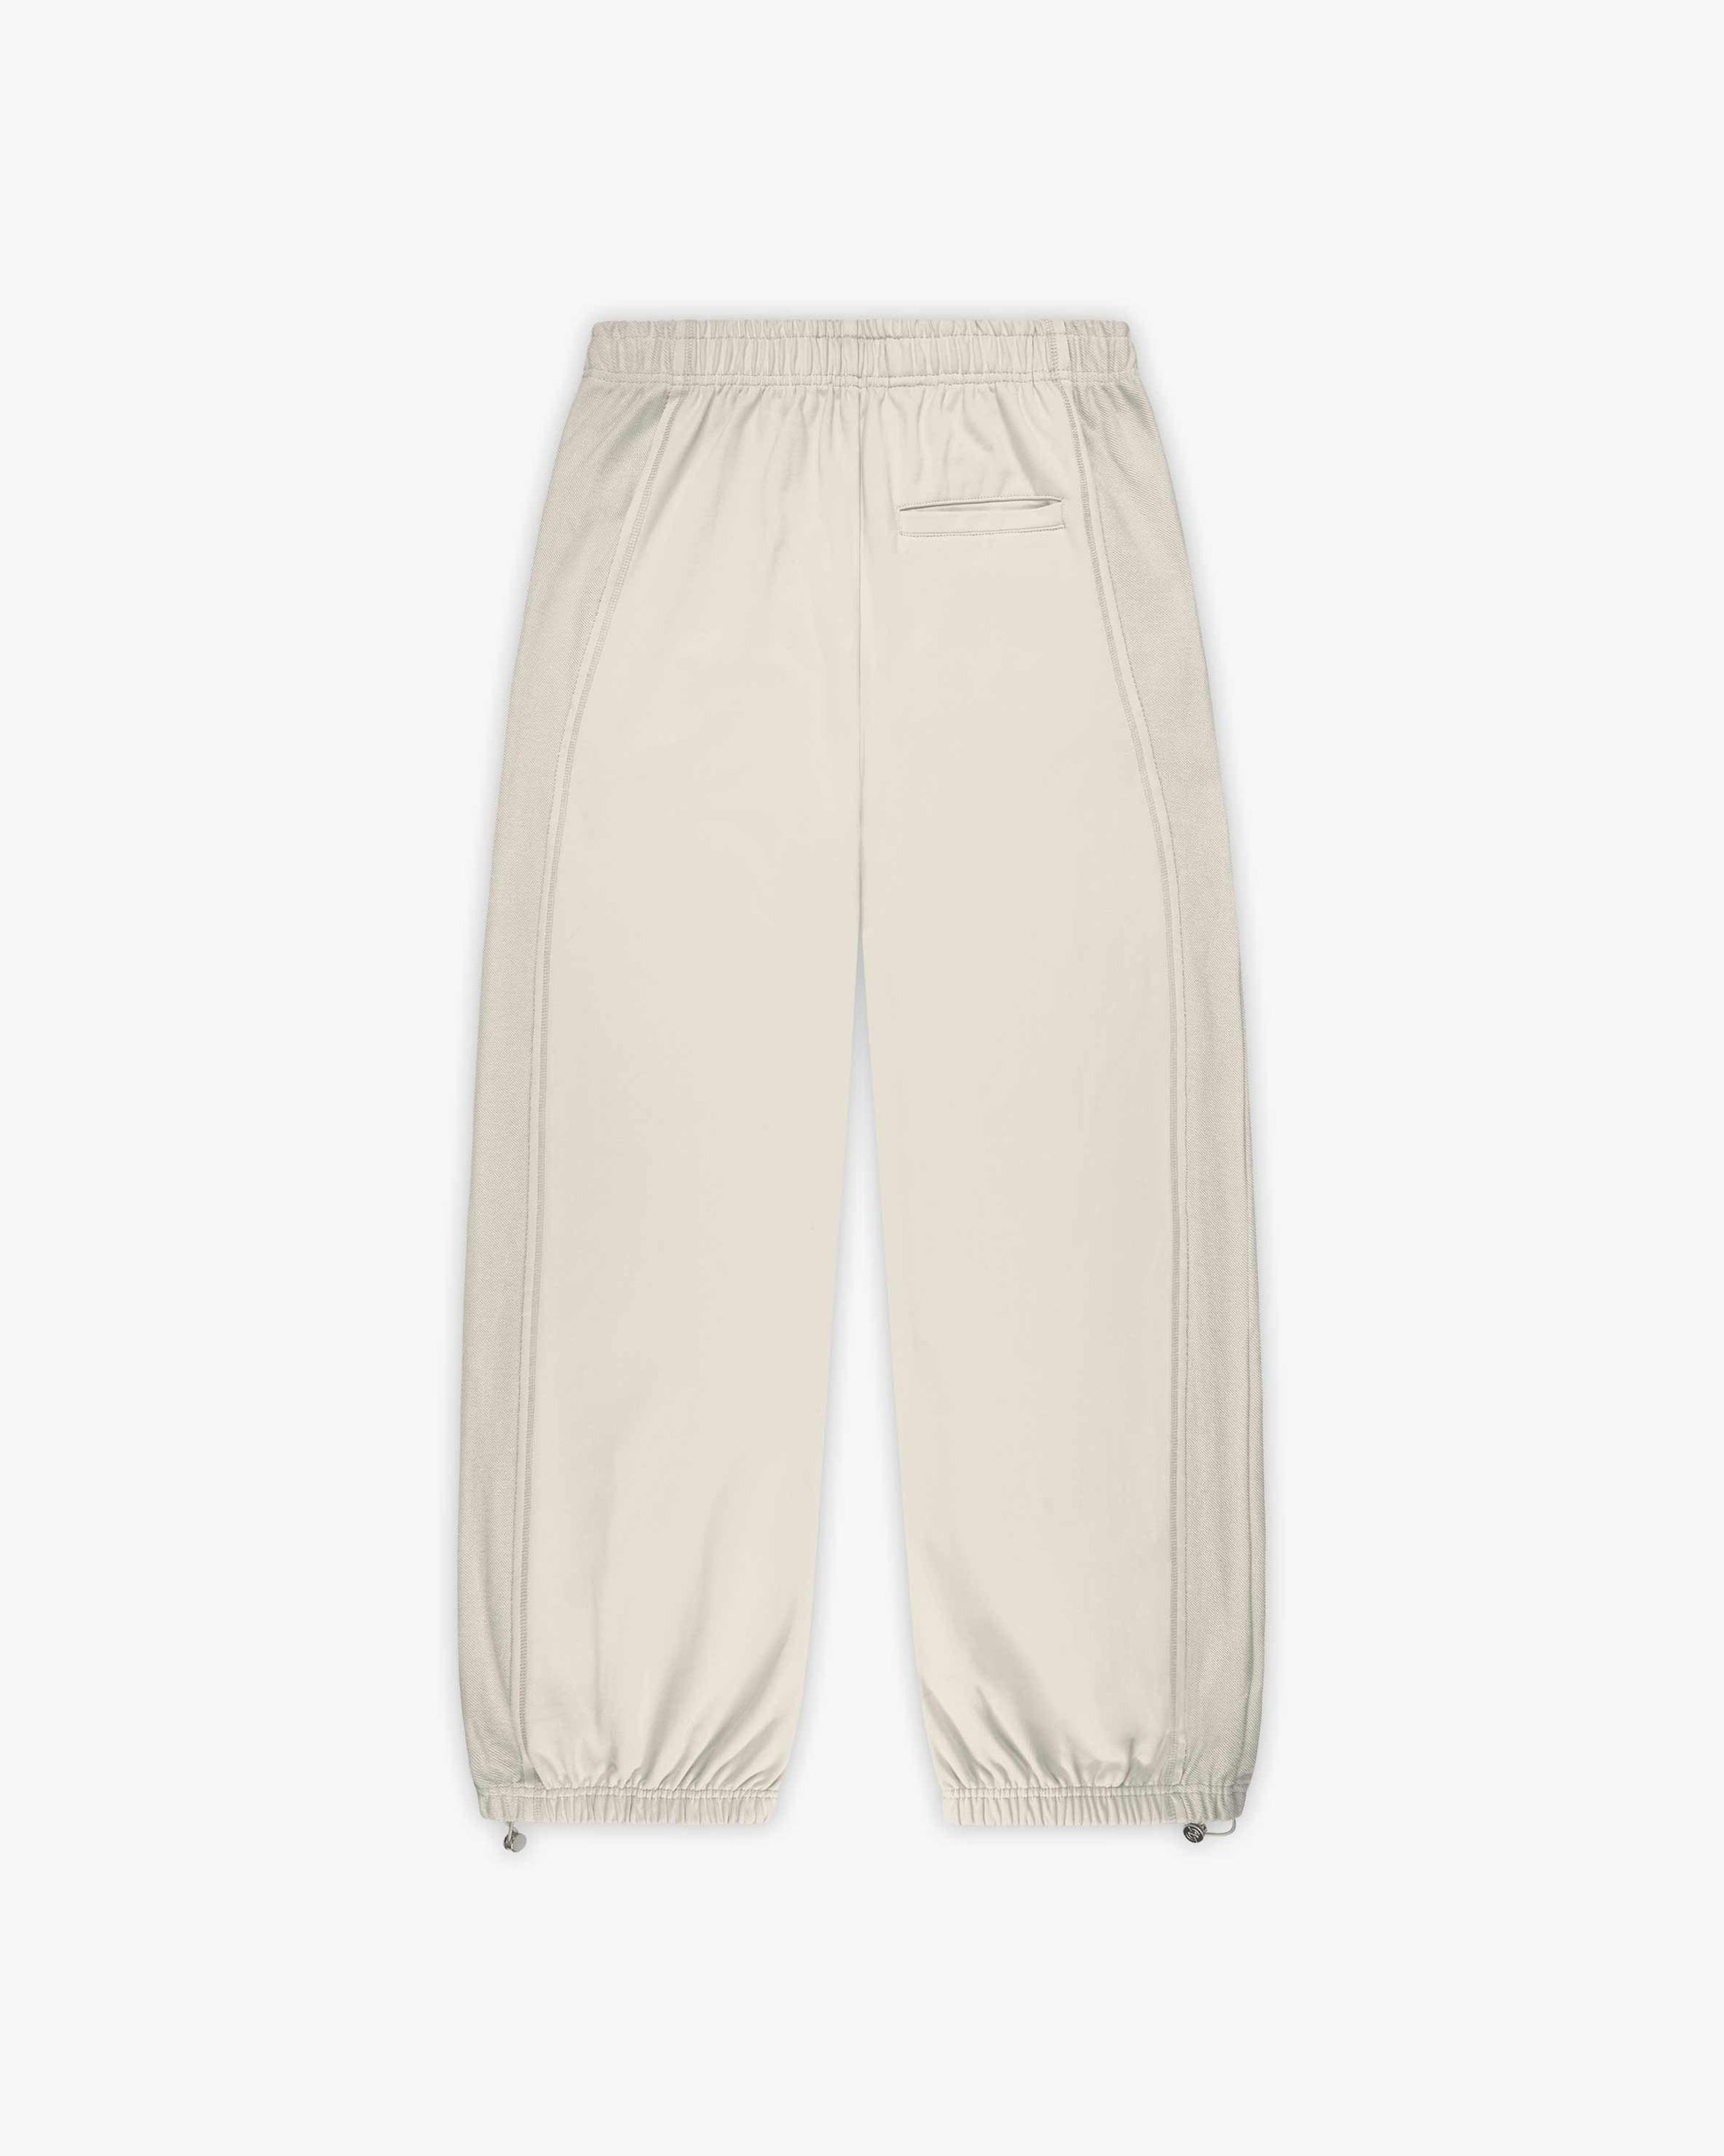 INSIDE OUT JOGGER BEIGE - VICINITY